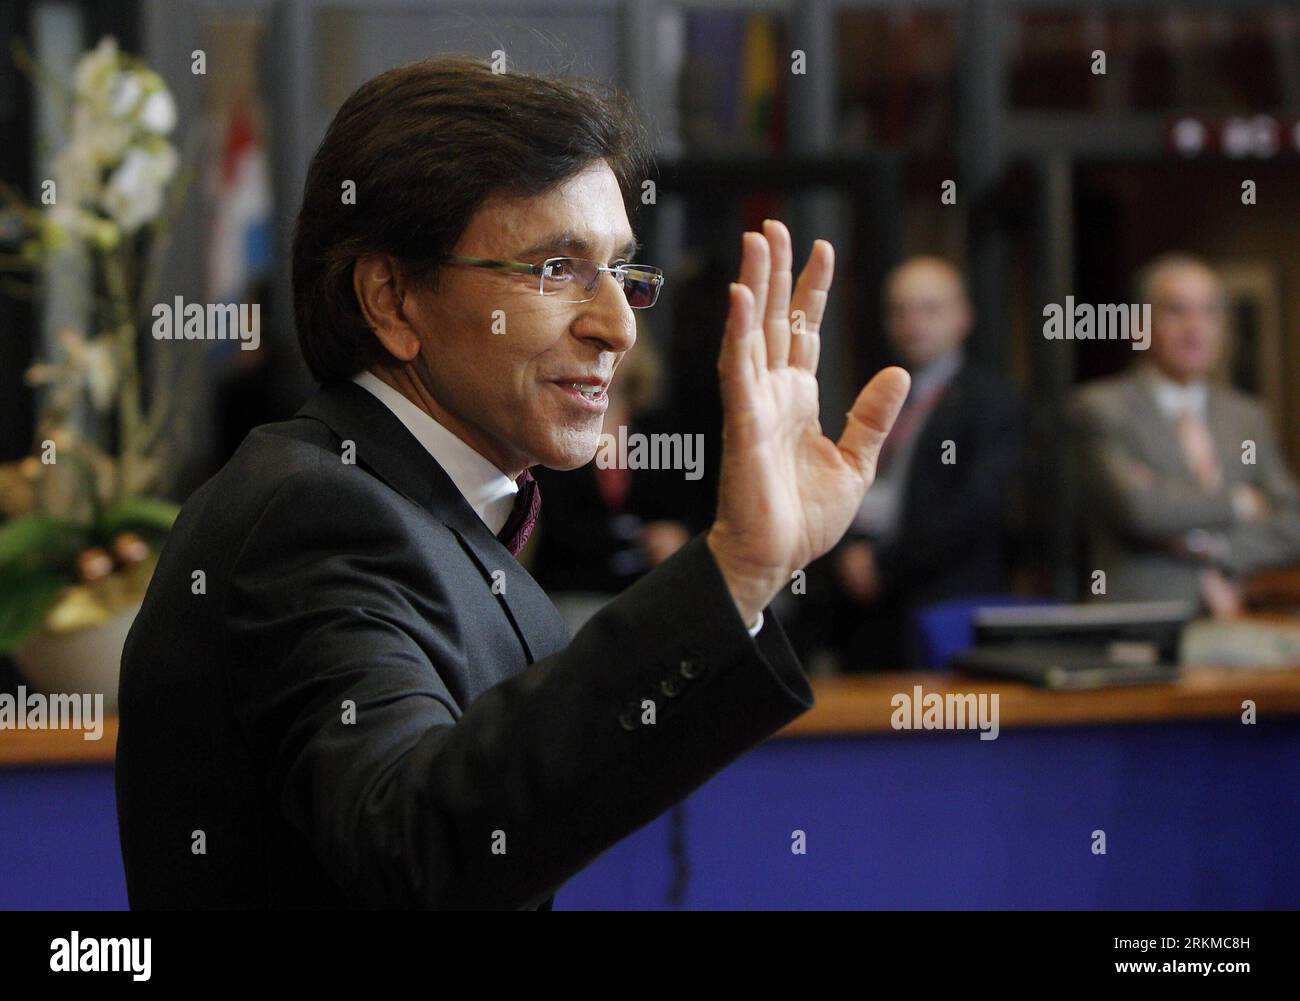 Bildnummer: 56675486  Datum: 08.12.2011  Copyright: imago/Xinhua (111208) -- BRUSSELS, Dec. 8, 2011 (Xinhua) -- Belgian Prime Minister Elio Di Rupo arrives for the EU summit at the EU headquarters in Brussels, capital of Belgium on Dec. 8, 2011. EU leaders gather in Brussels on Thursday and Friday for an EU summit to discuss crucial treaty changes, strengthening tougher fiscal disciplines and an early introduction of the European Stability Mechanism (ESM). (Xinhua/Zhou Lei) (yt) BELGIUM-BRUSSELS-EU-SUMMIT PUBLICATIONxNOTxINxCHN People Politik Euro Gipfel Eurogipfel Rettungsgipfel Ankunft xjh x Stock Photo